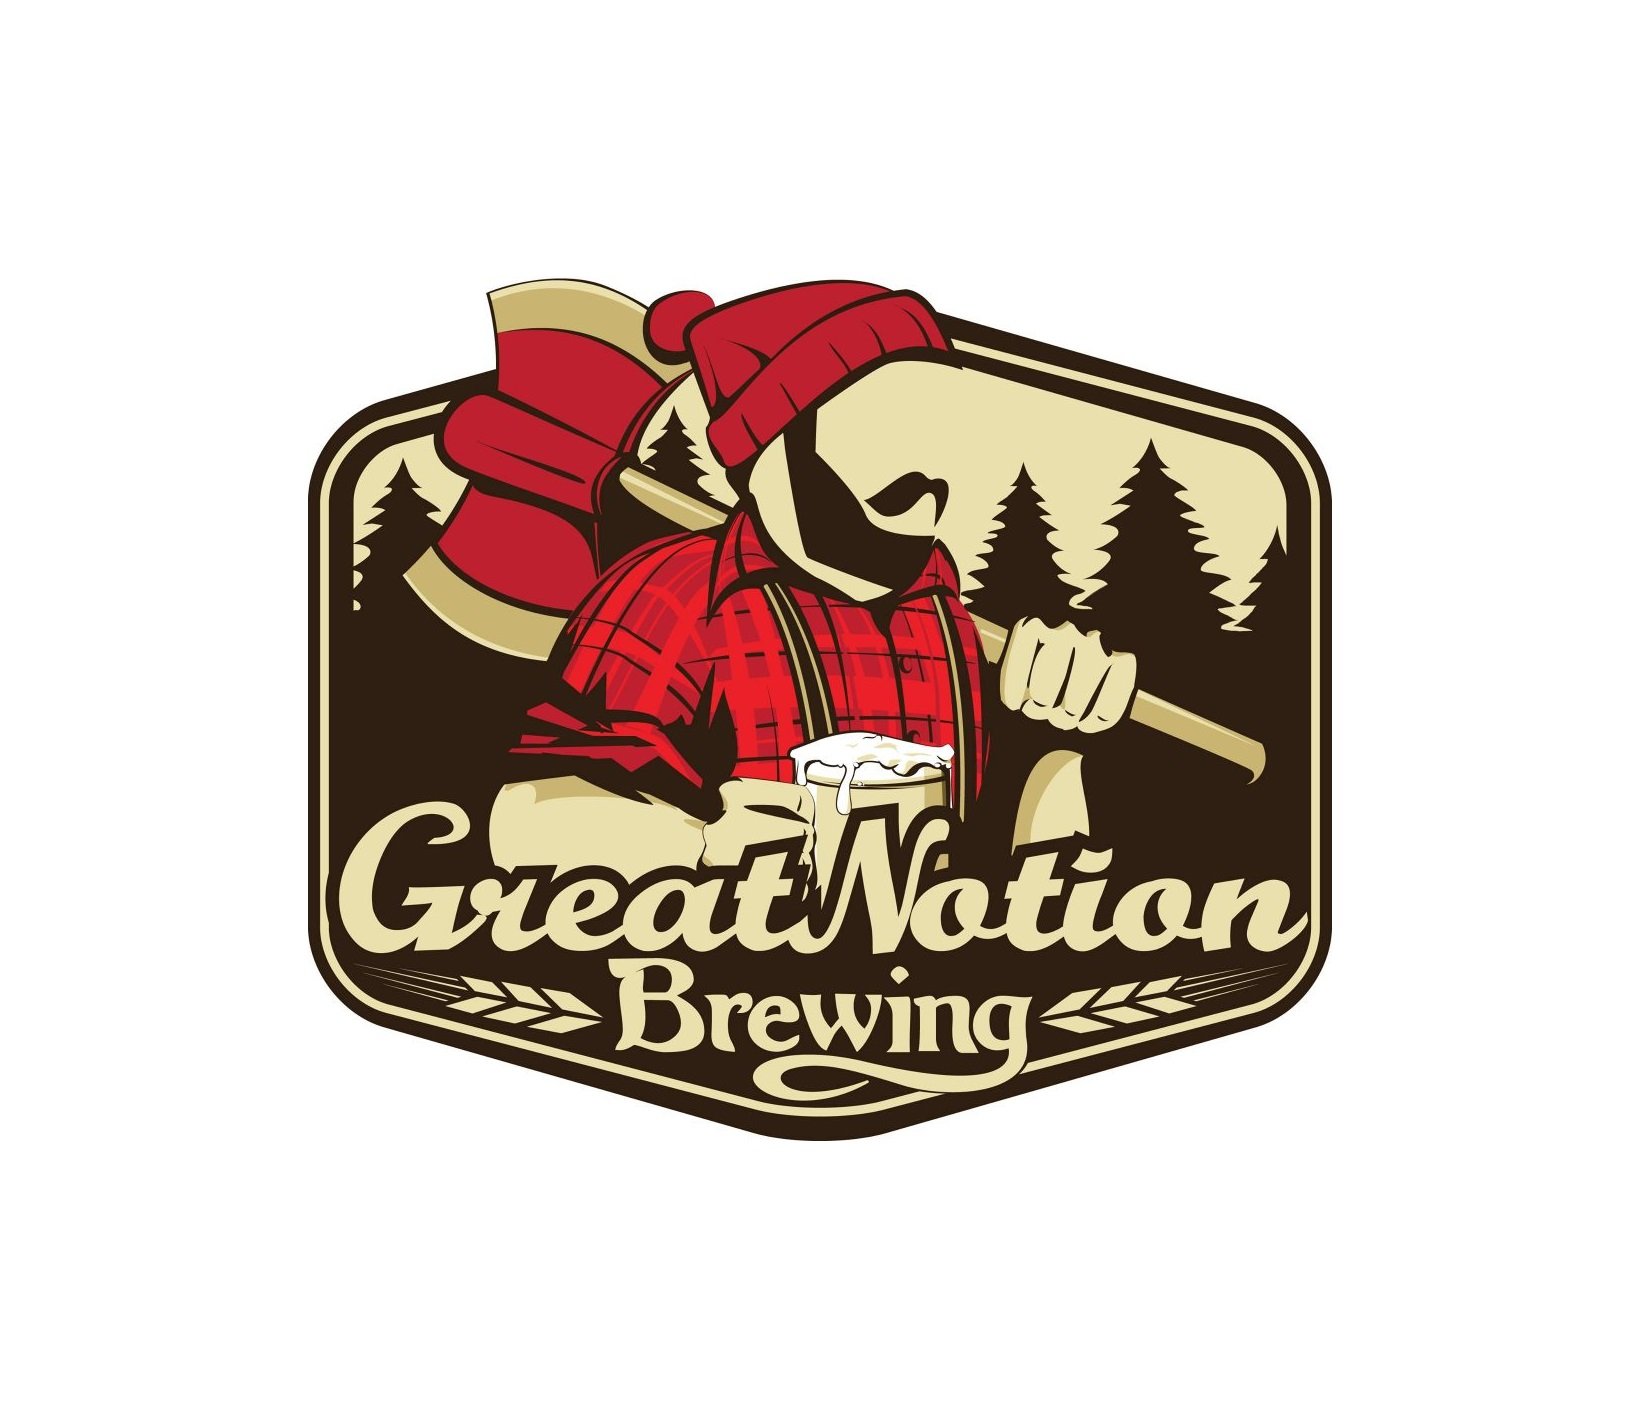 a great notion brewery